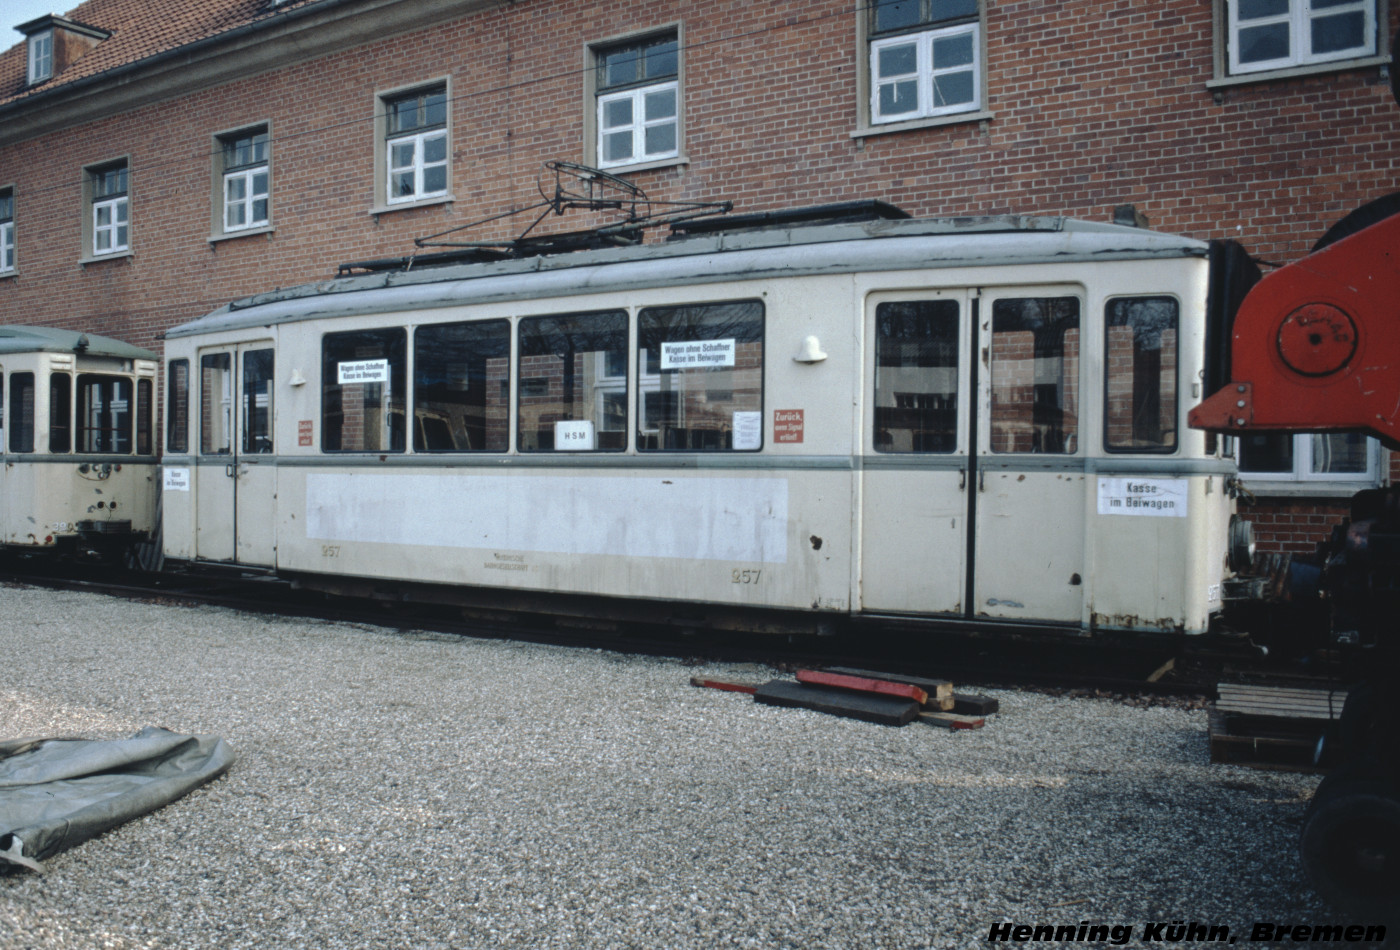 Duewag 2 axeled tram #257